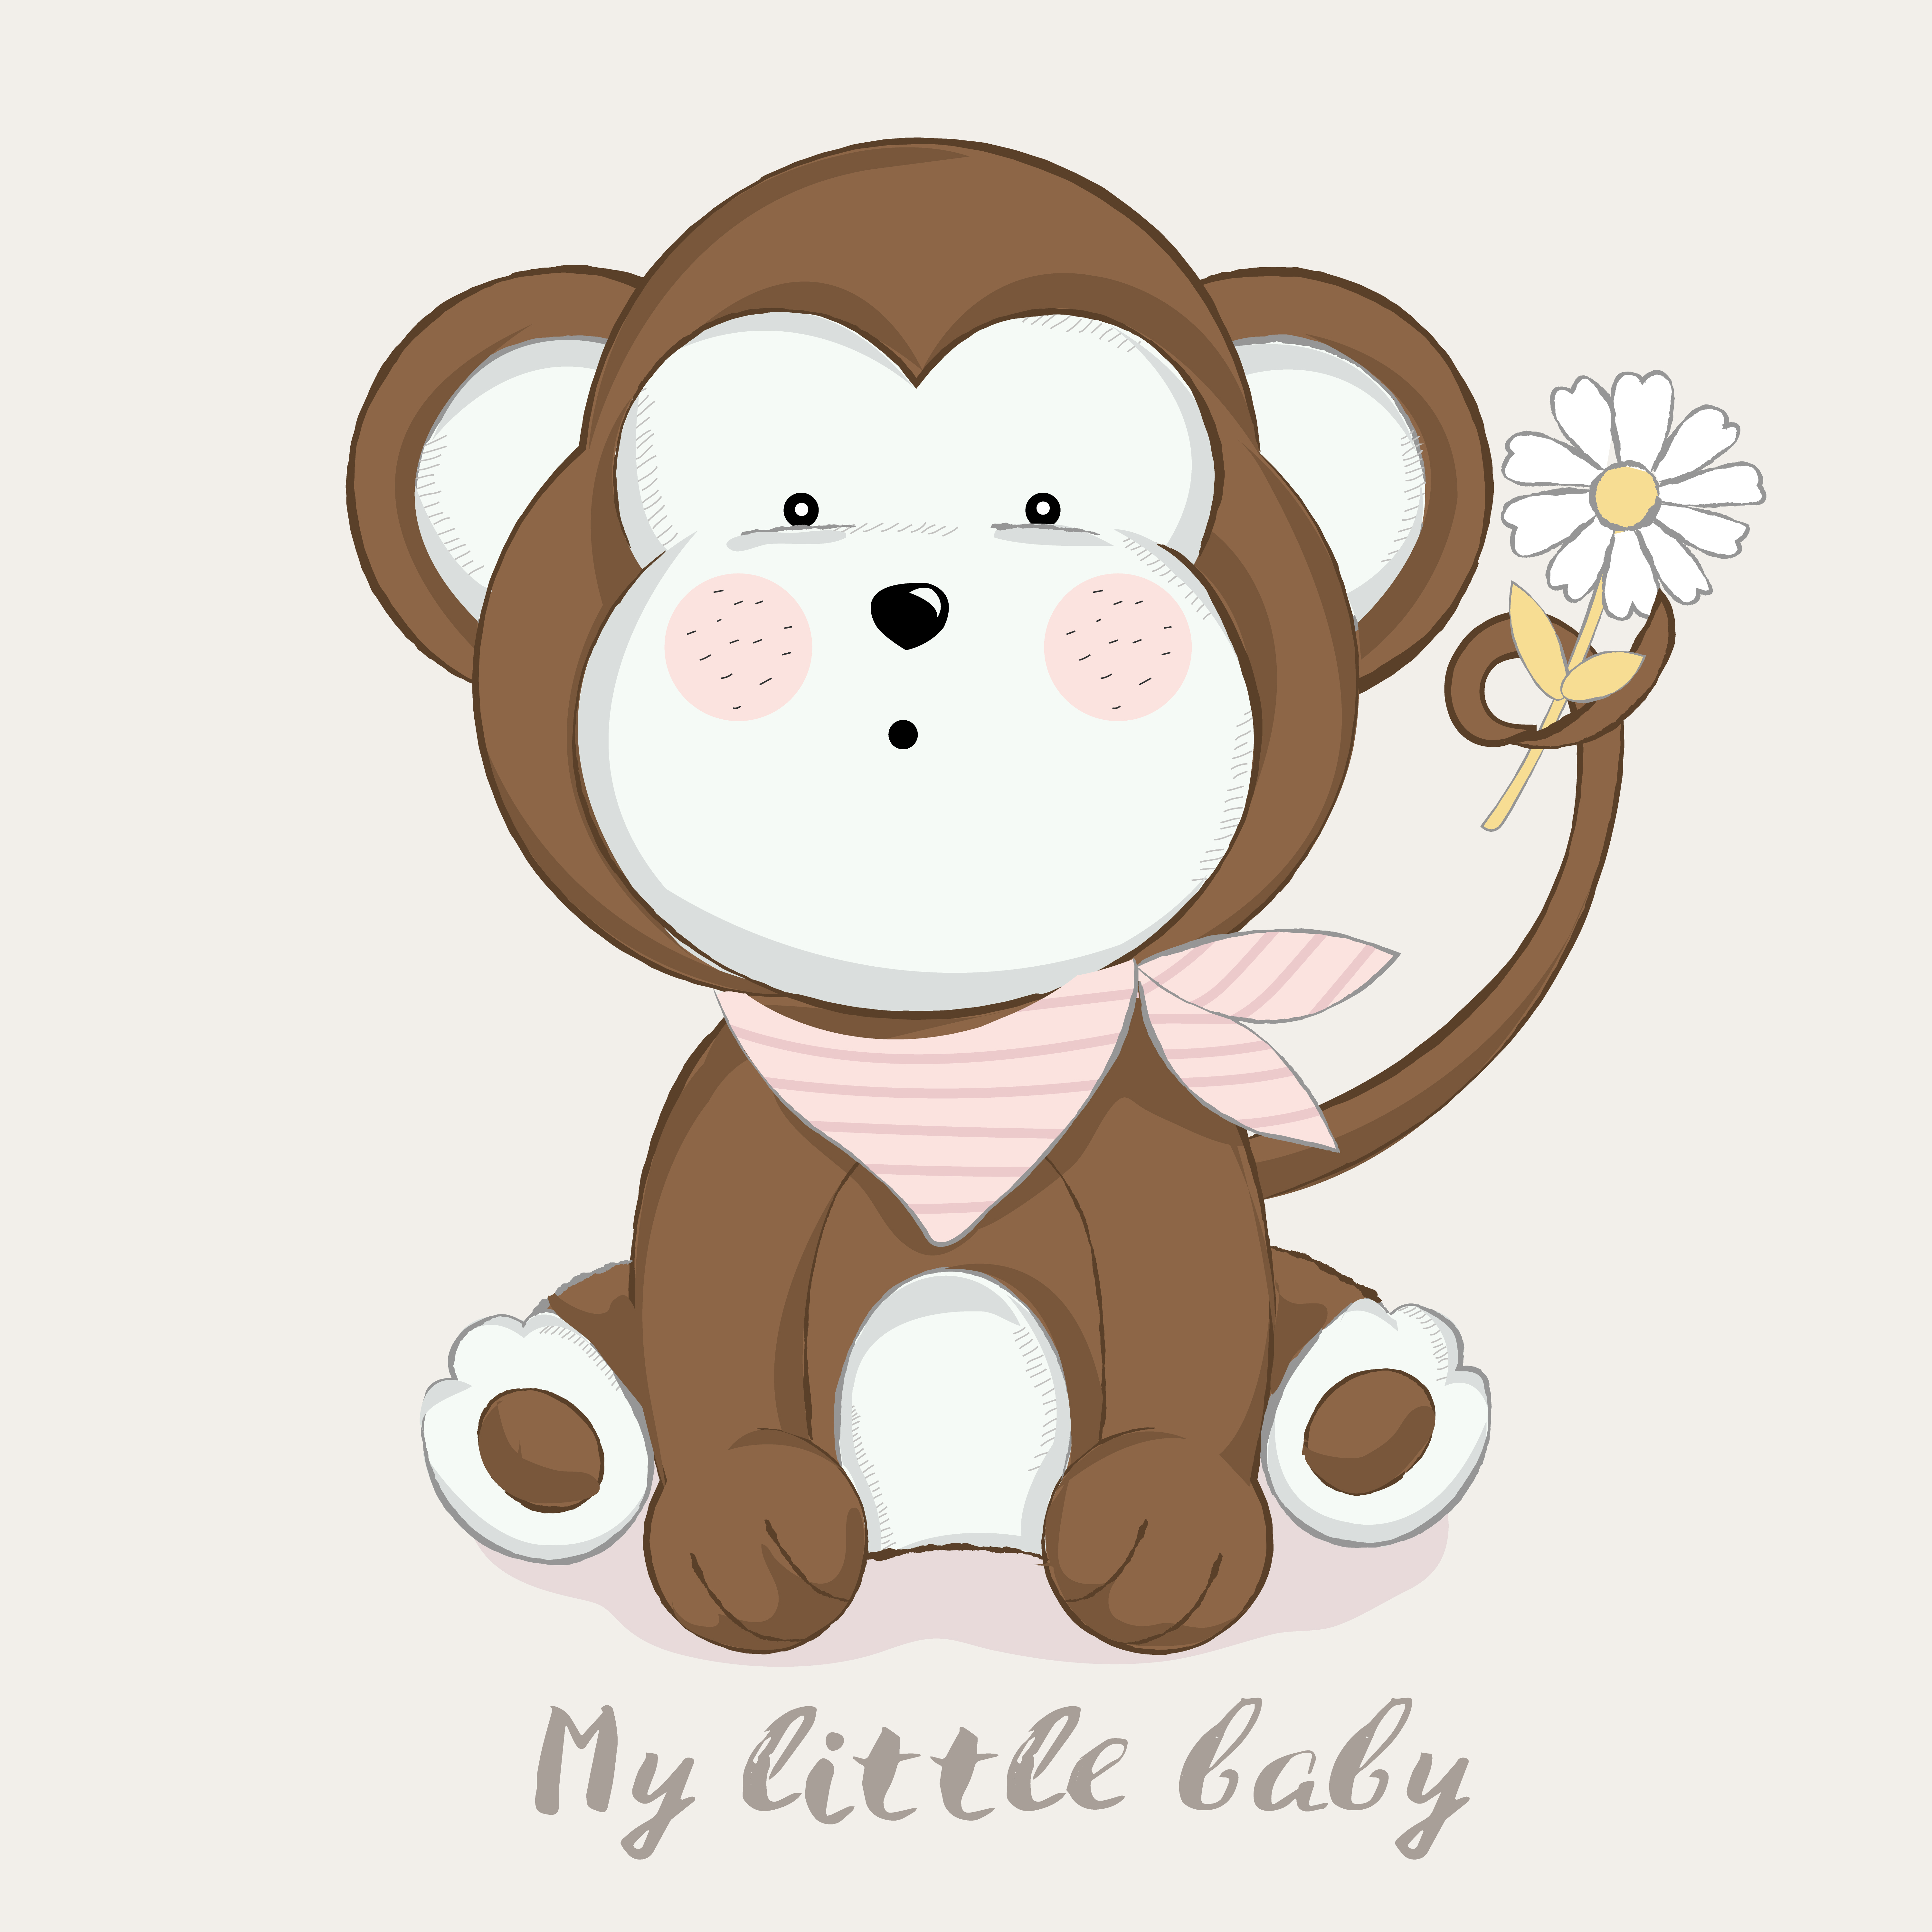 Cute Baby Monkey Cartoon Hand Drawn Style Vector Illustration Download Free Vectors Clipart Graphics Vector Art